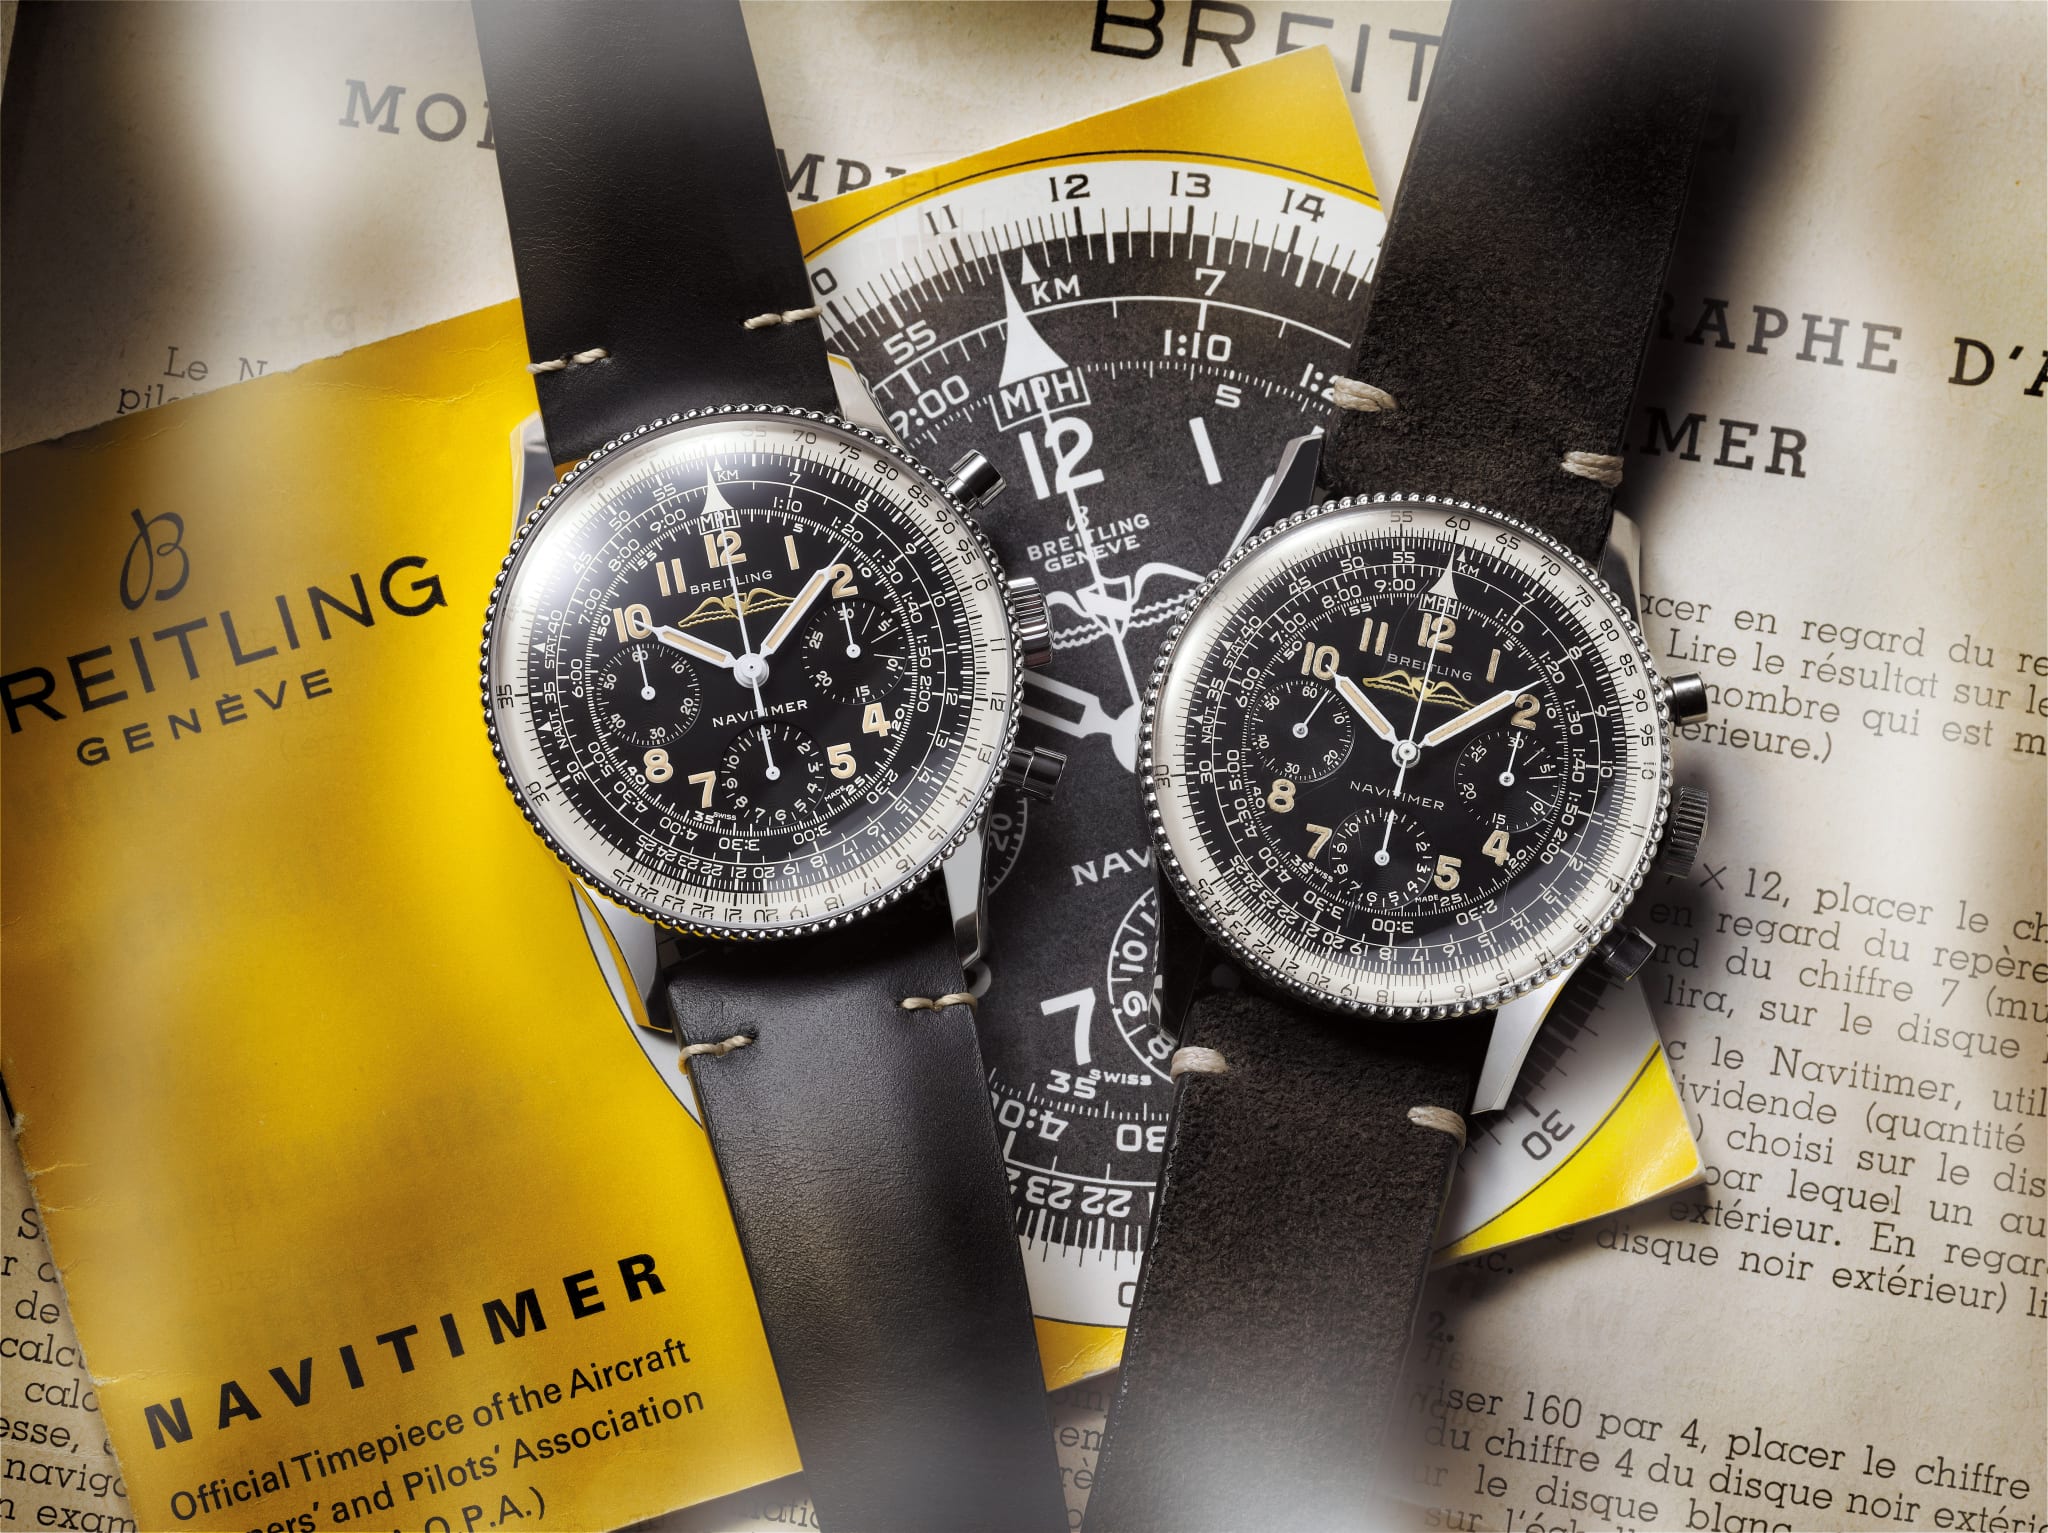 Breitling navitimer 02 navitimer ref. 806 1959 re edition and the historical navitimer ref. 806 from 1959 left to right 21694 14 03 19